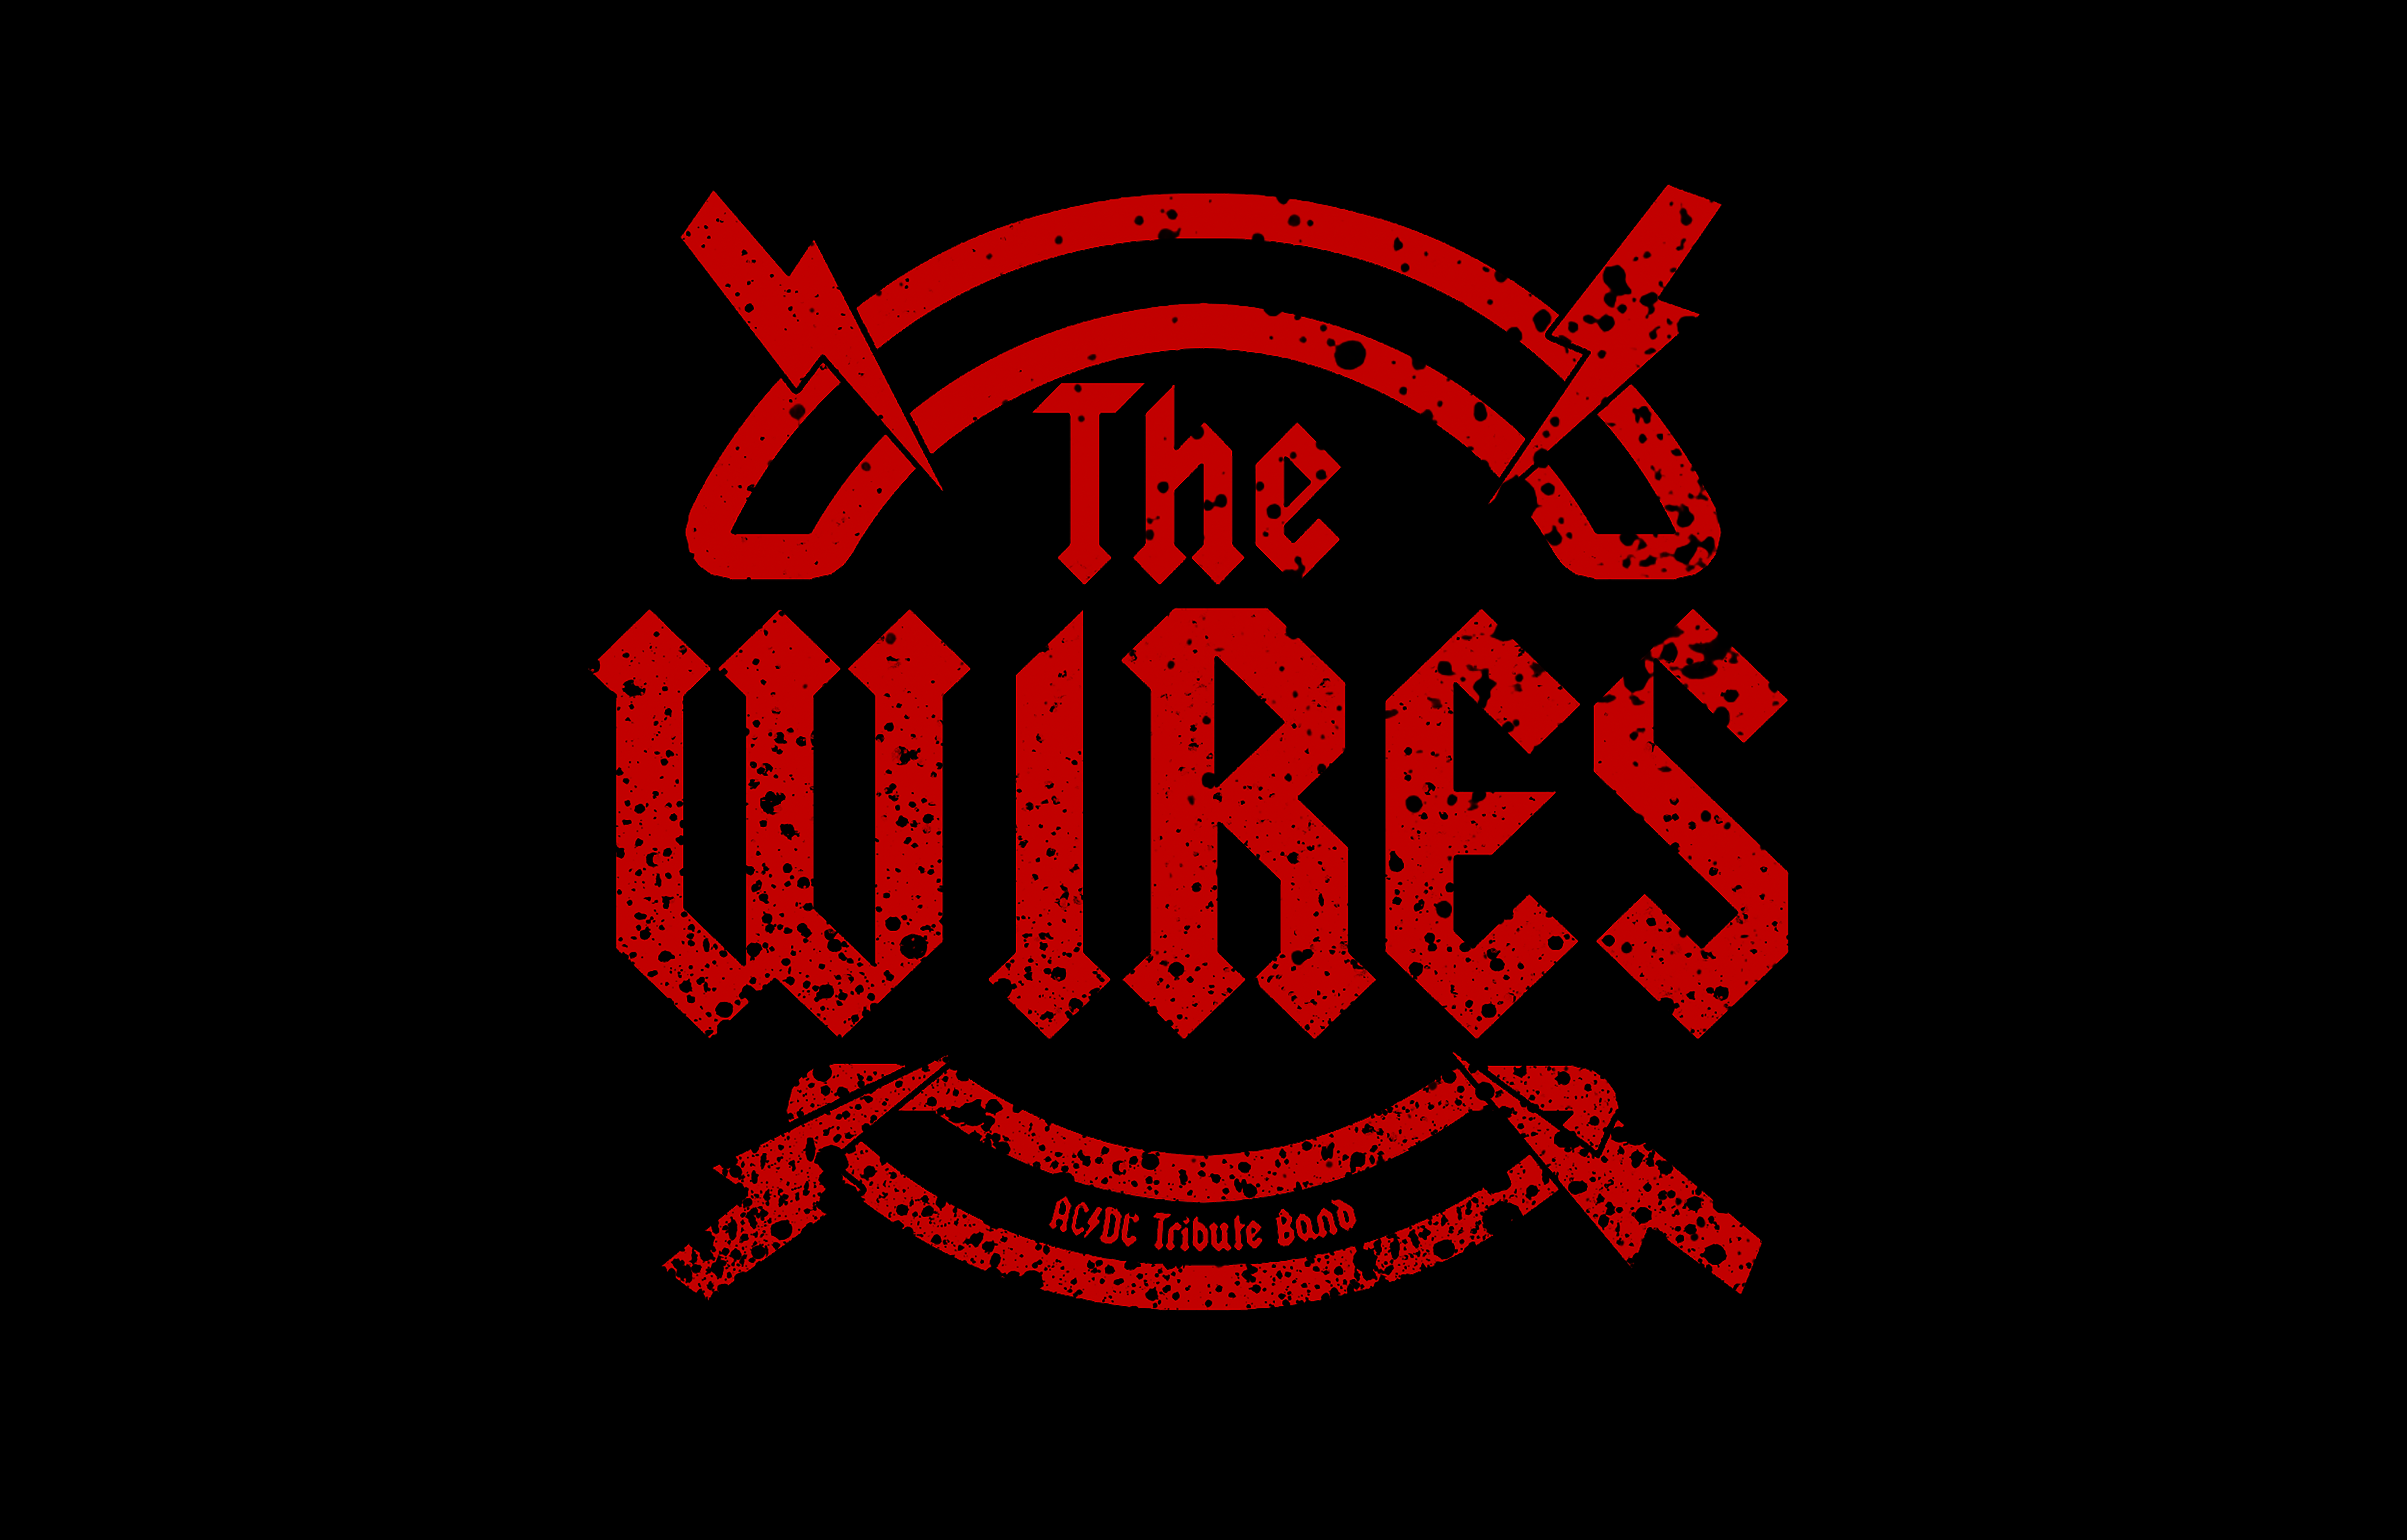 THE WIRES